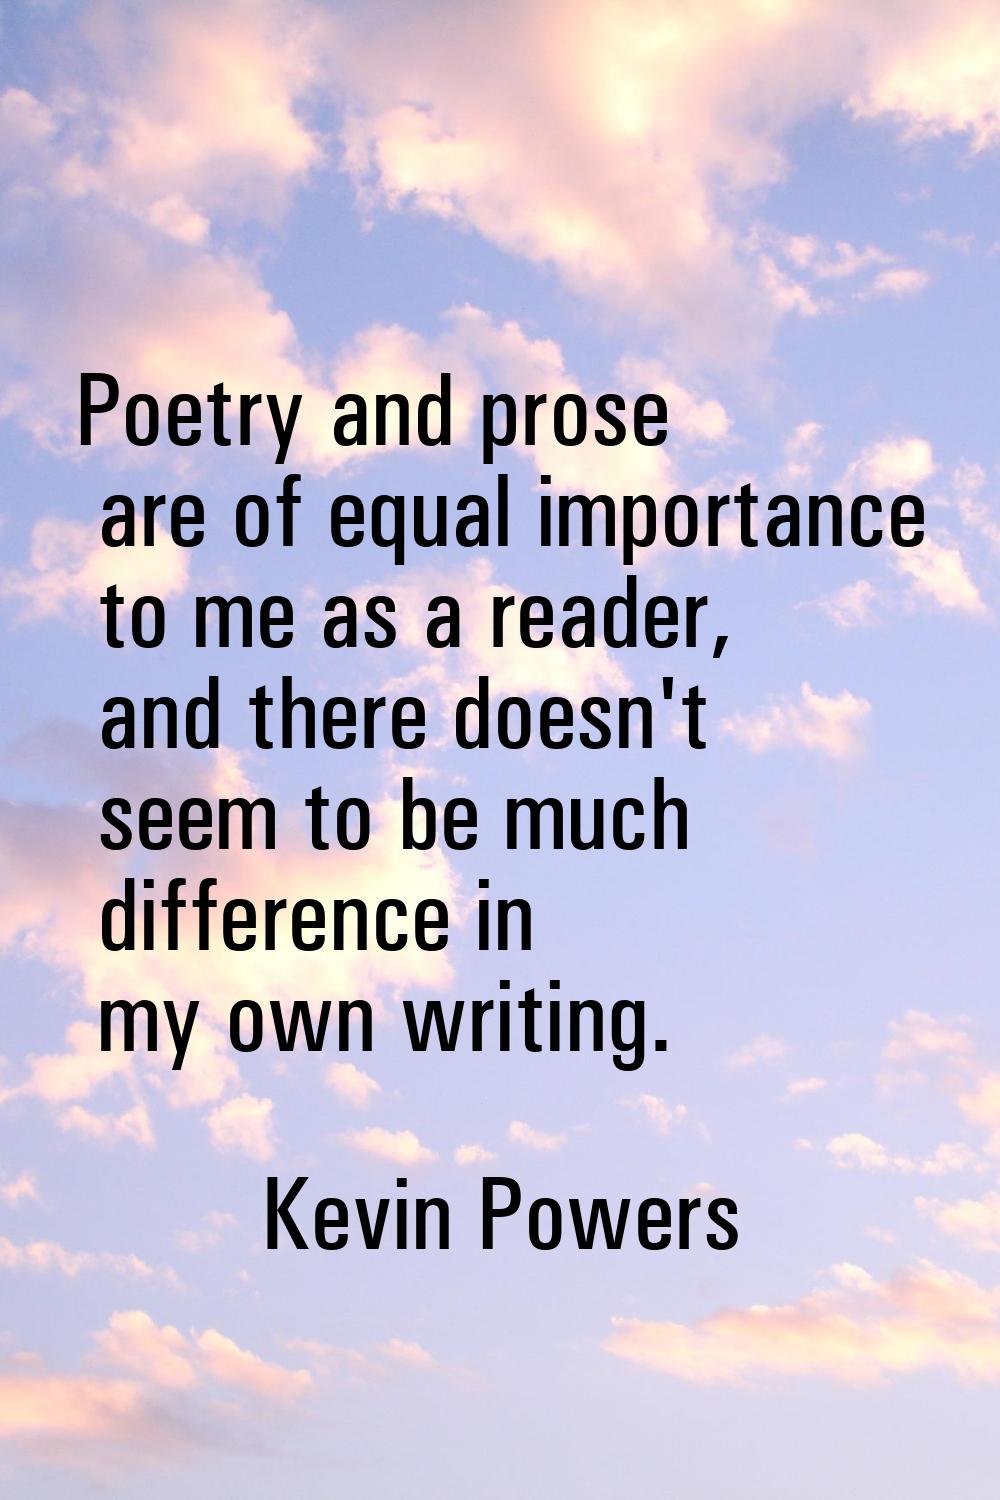 Poetry and prose are of equal importance to me as a reader, and there doesn't seem to be much diffe